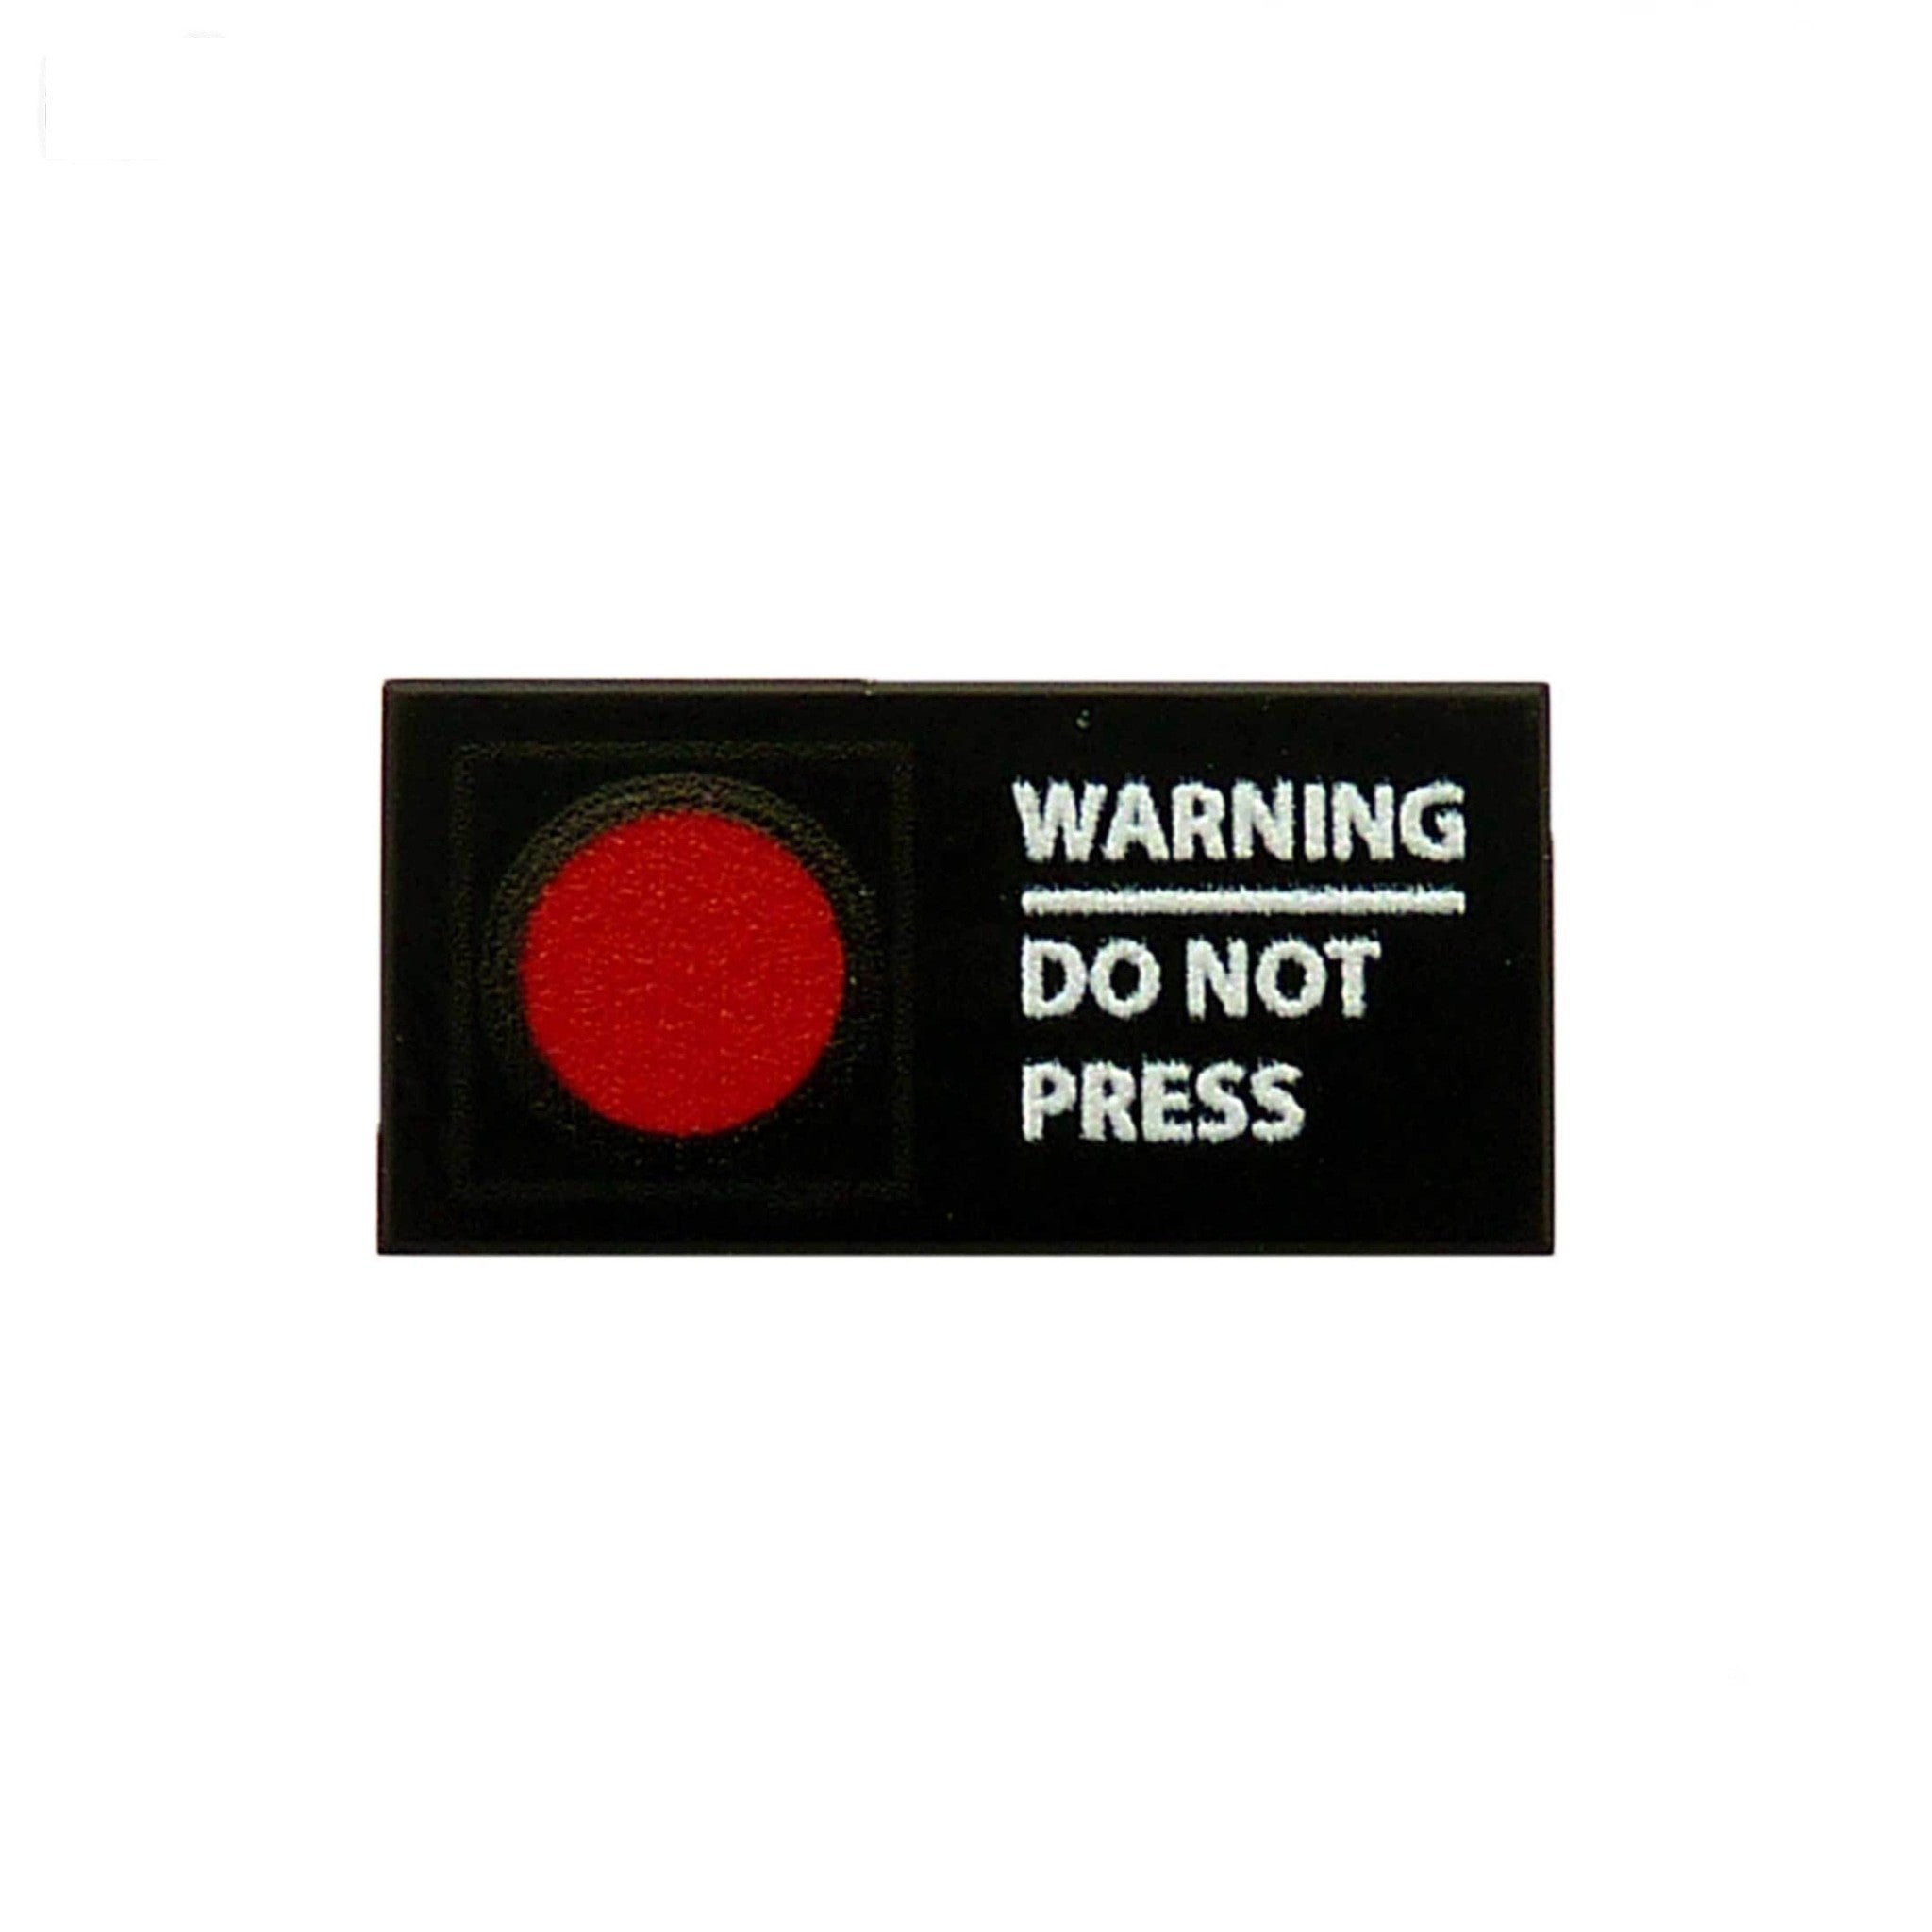 GitHub - jklewa/big-red-button: Do Not Press The Big Red Button